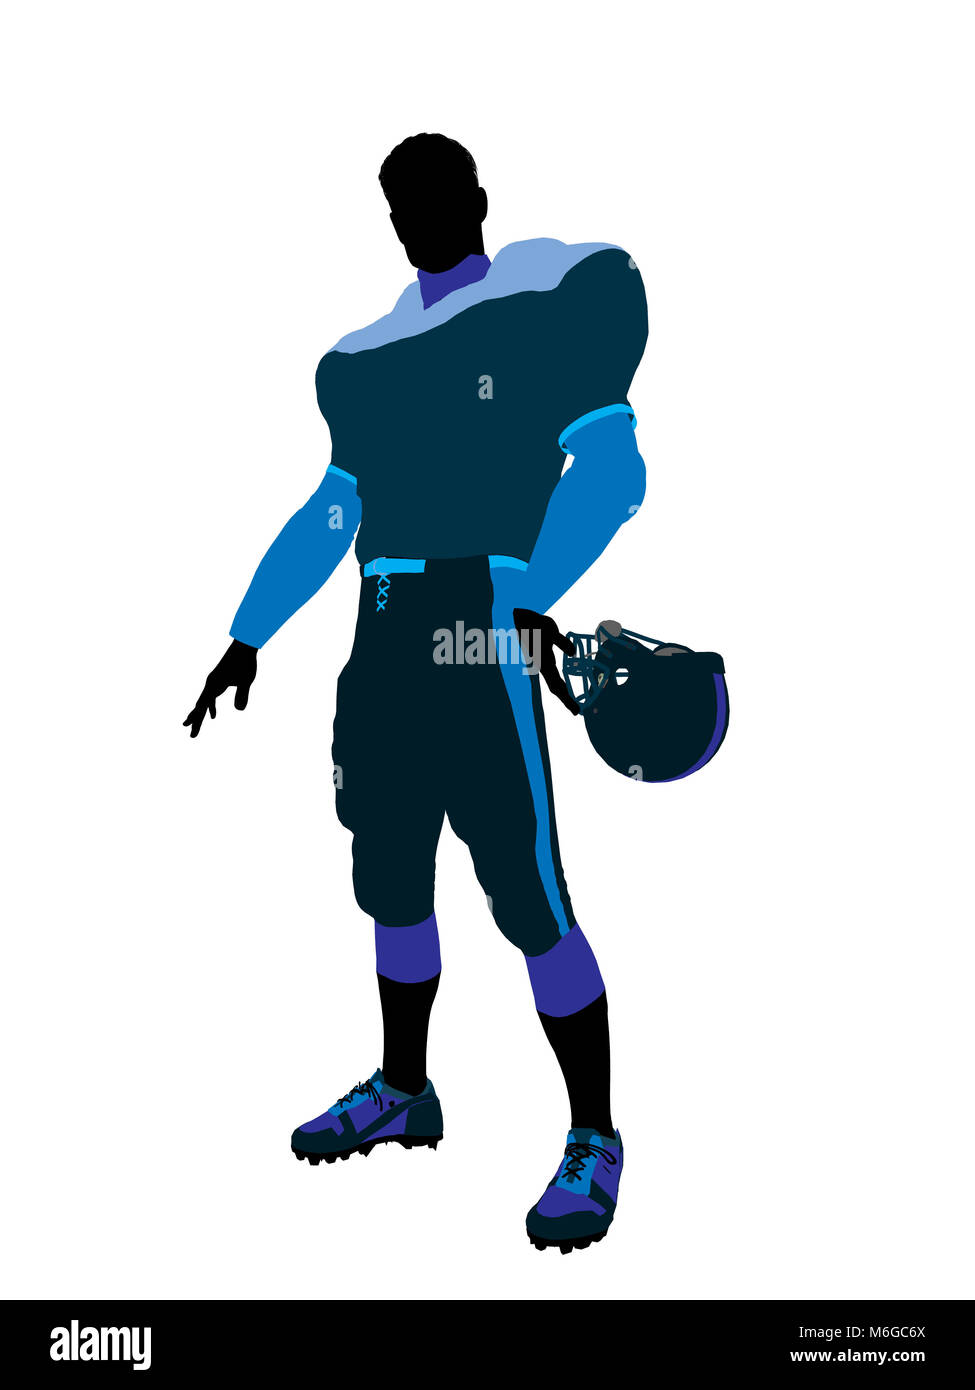 Male football player with his helmet art illustration silhouette on a white background Stock Photo